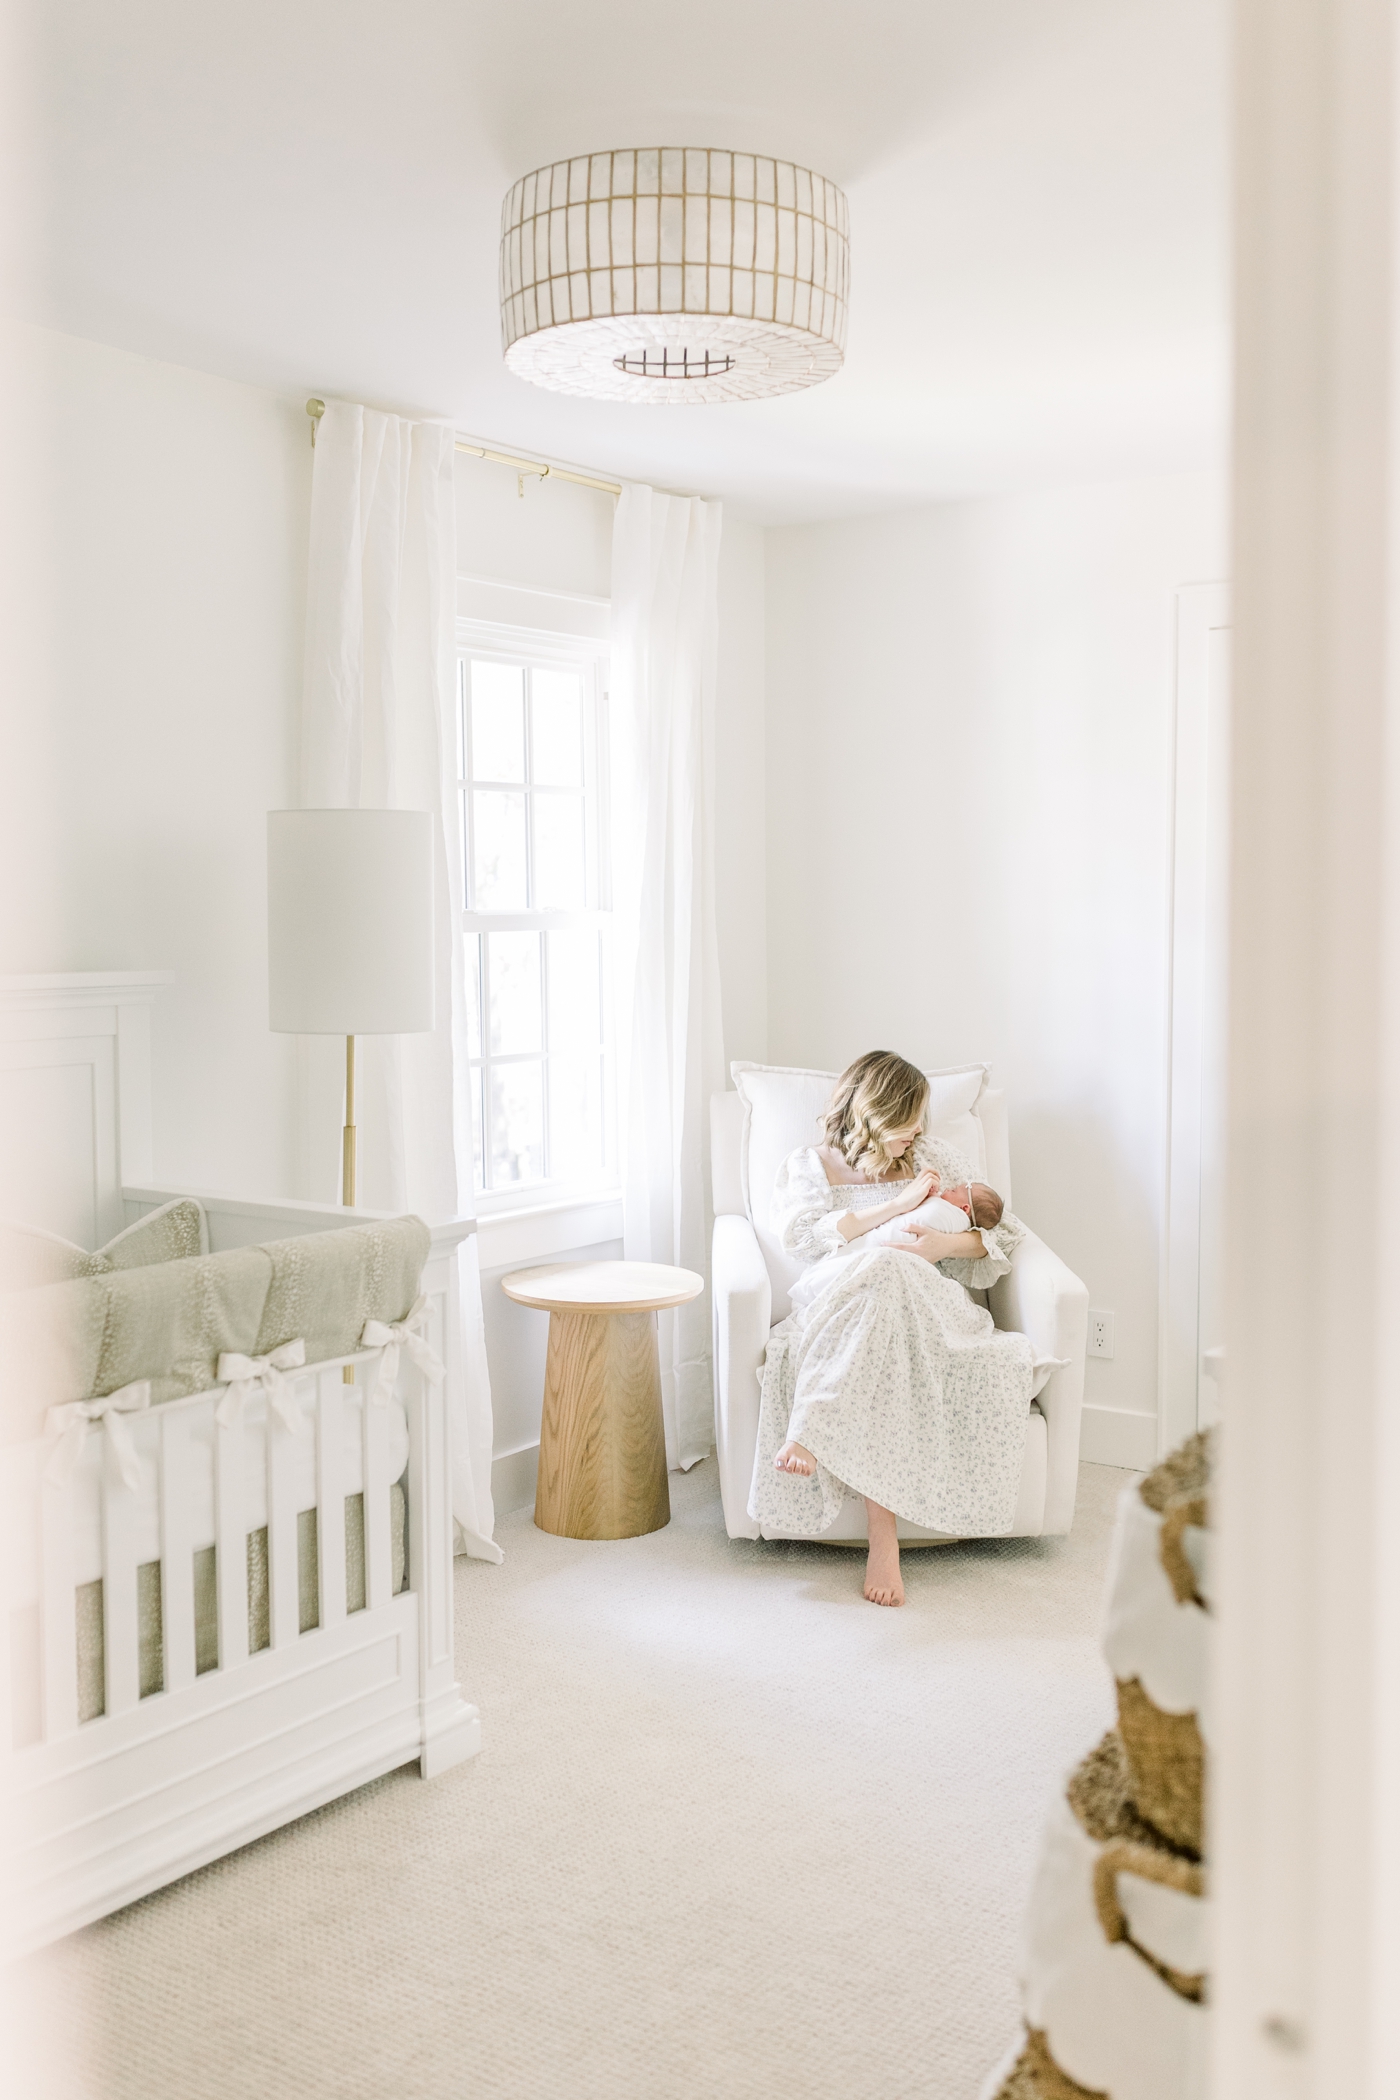 Mom holding new baby in a neutral nursery | Photo by Caitlyn Motycka Photography.